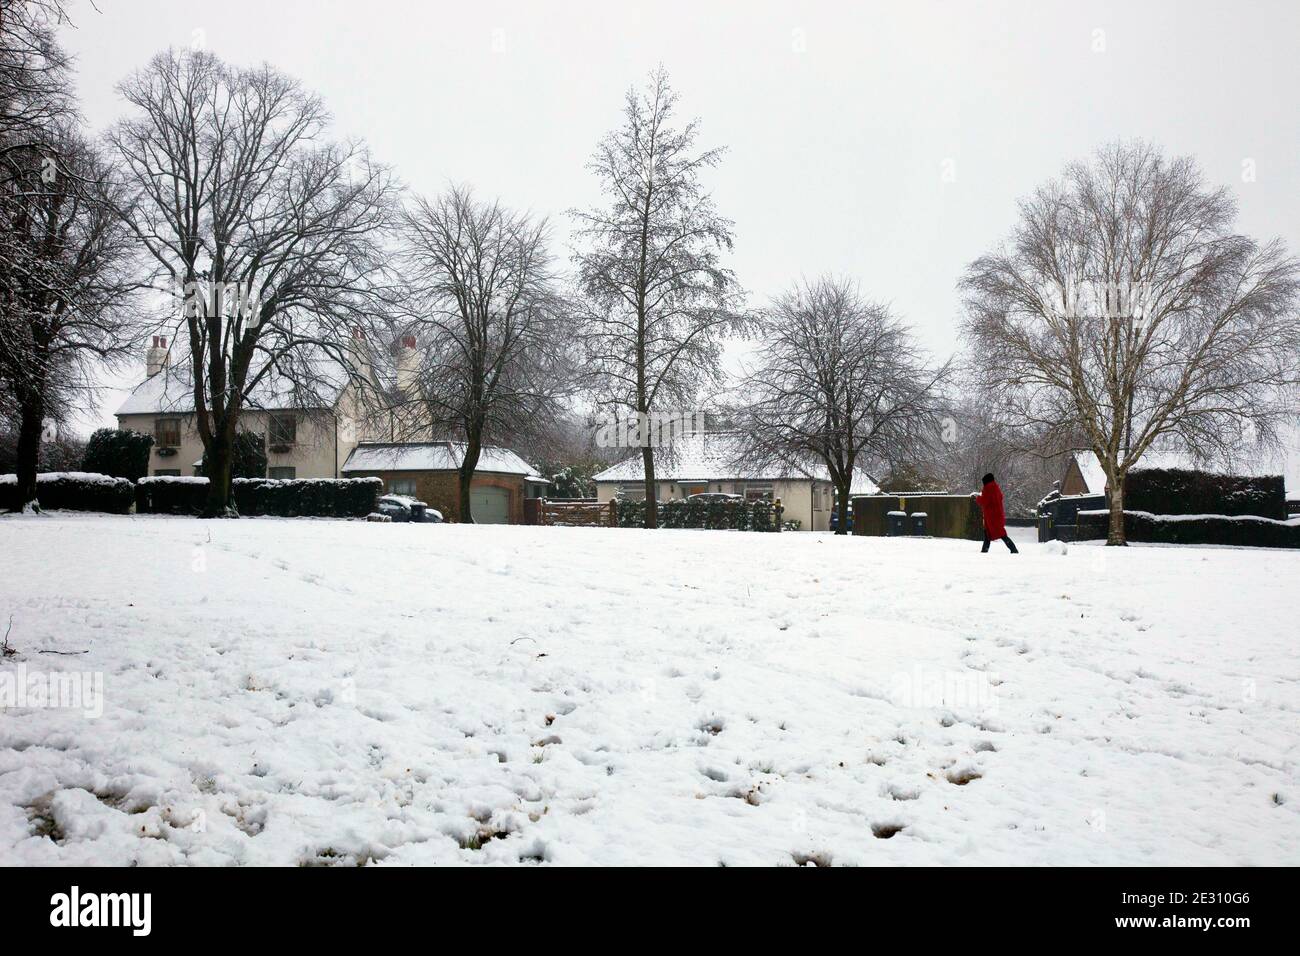 Snow covers the Green in Tatsfield village, on the Kent and Surrey border in England. January 2021 Stock Photo